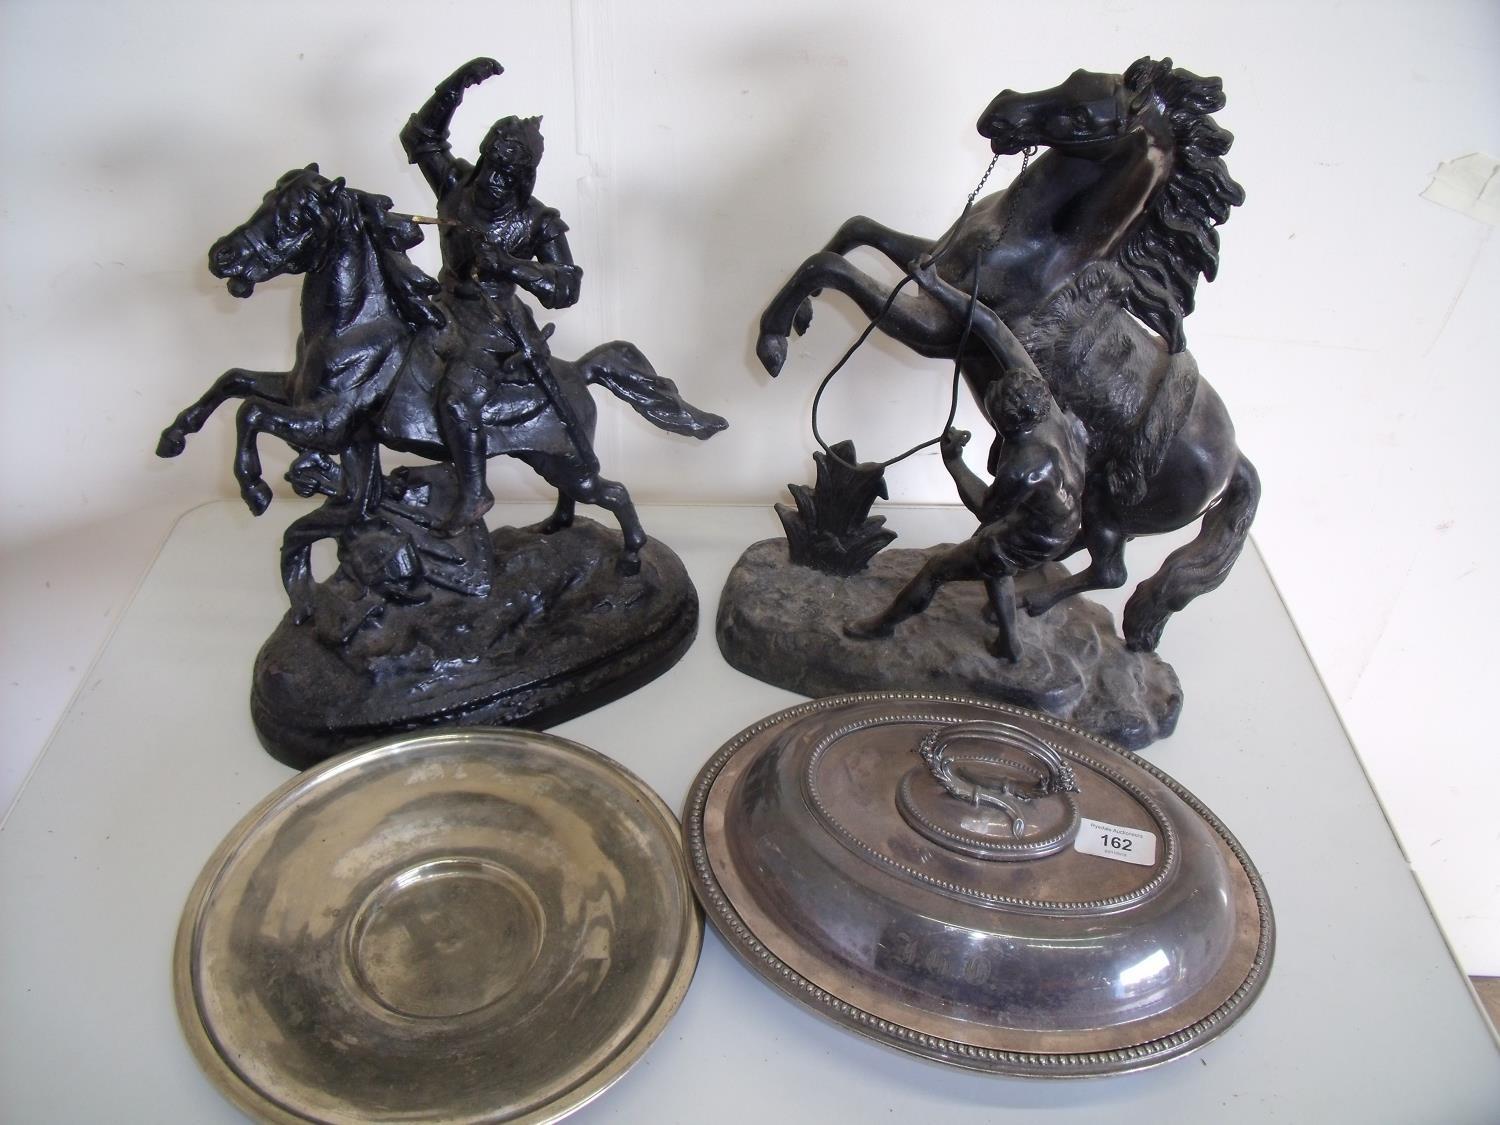 Two Victorian spelter figures on horseback, a silver plated baking tray and a silver plated dish